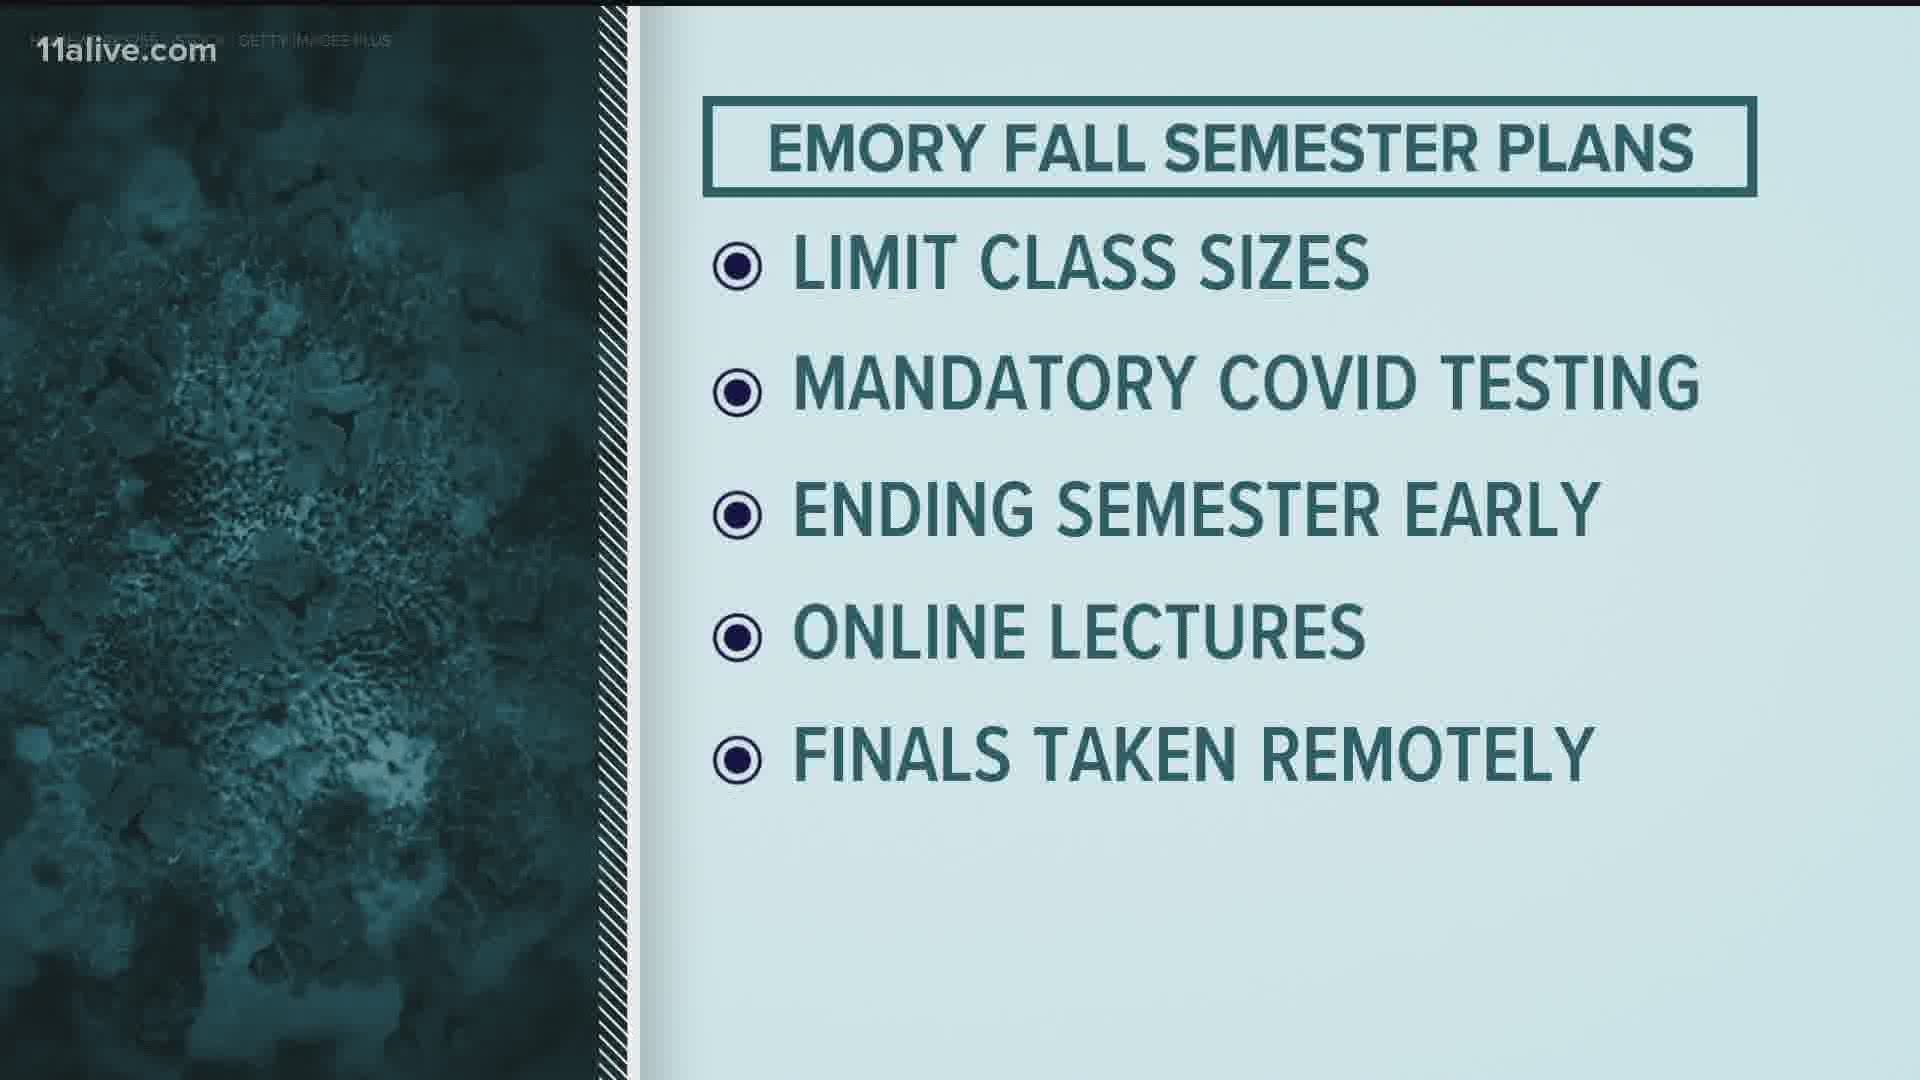 Emory Academic Calendar Spring 2022 Emory University Plans To Reopen In Fall After Coronavirus | 11Alive.com